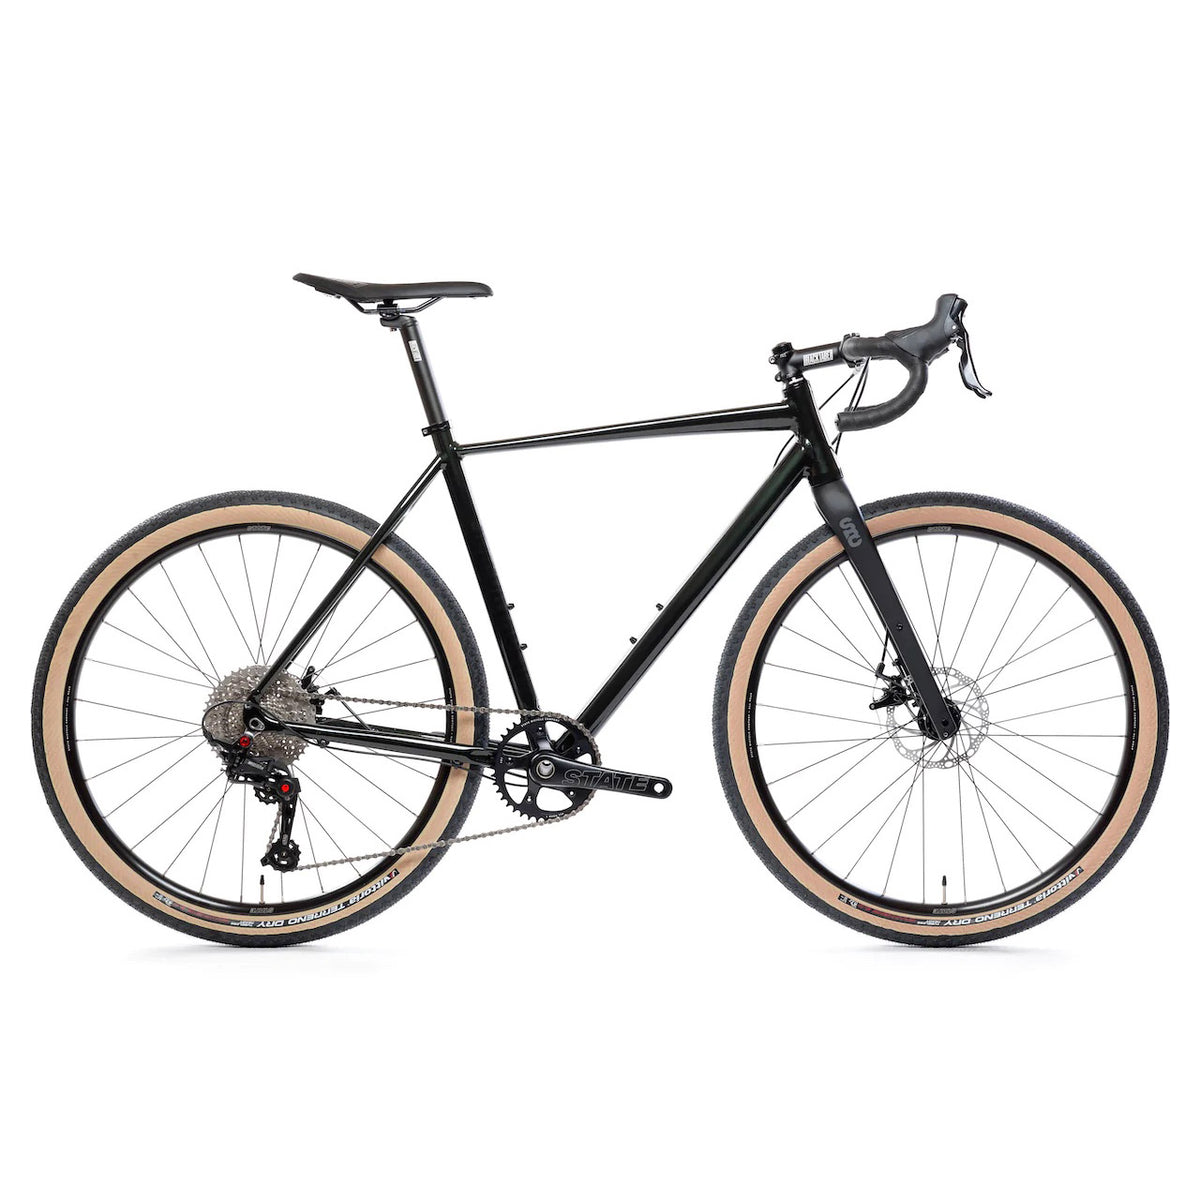 Hero image featuring a side angle photo of the State 6061 Black Label All-Road bike in Dark Woodland Green.